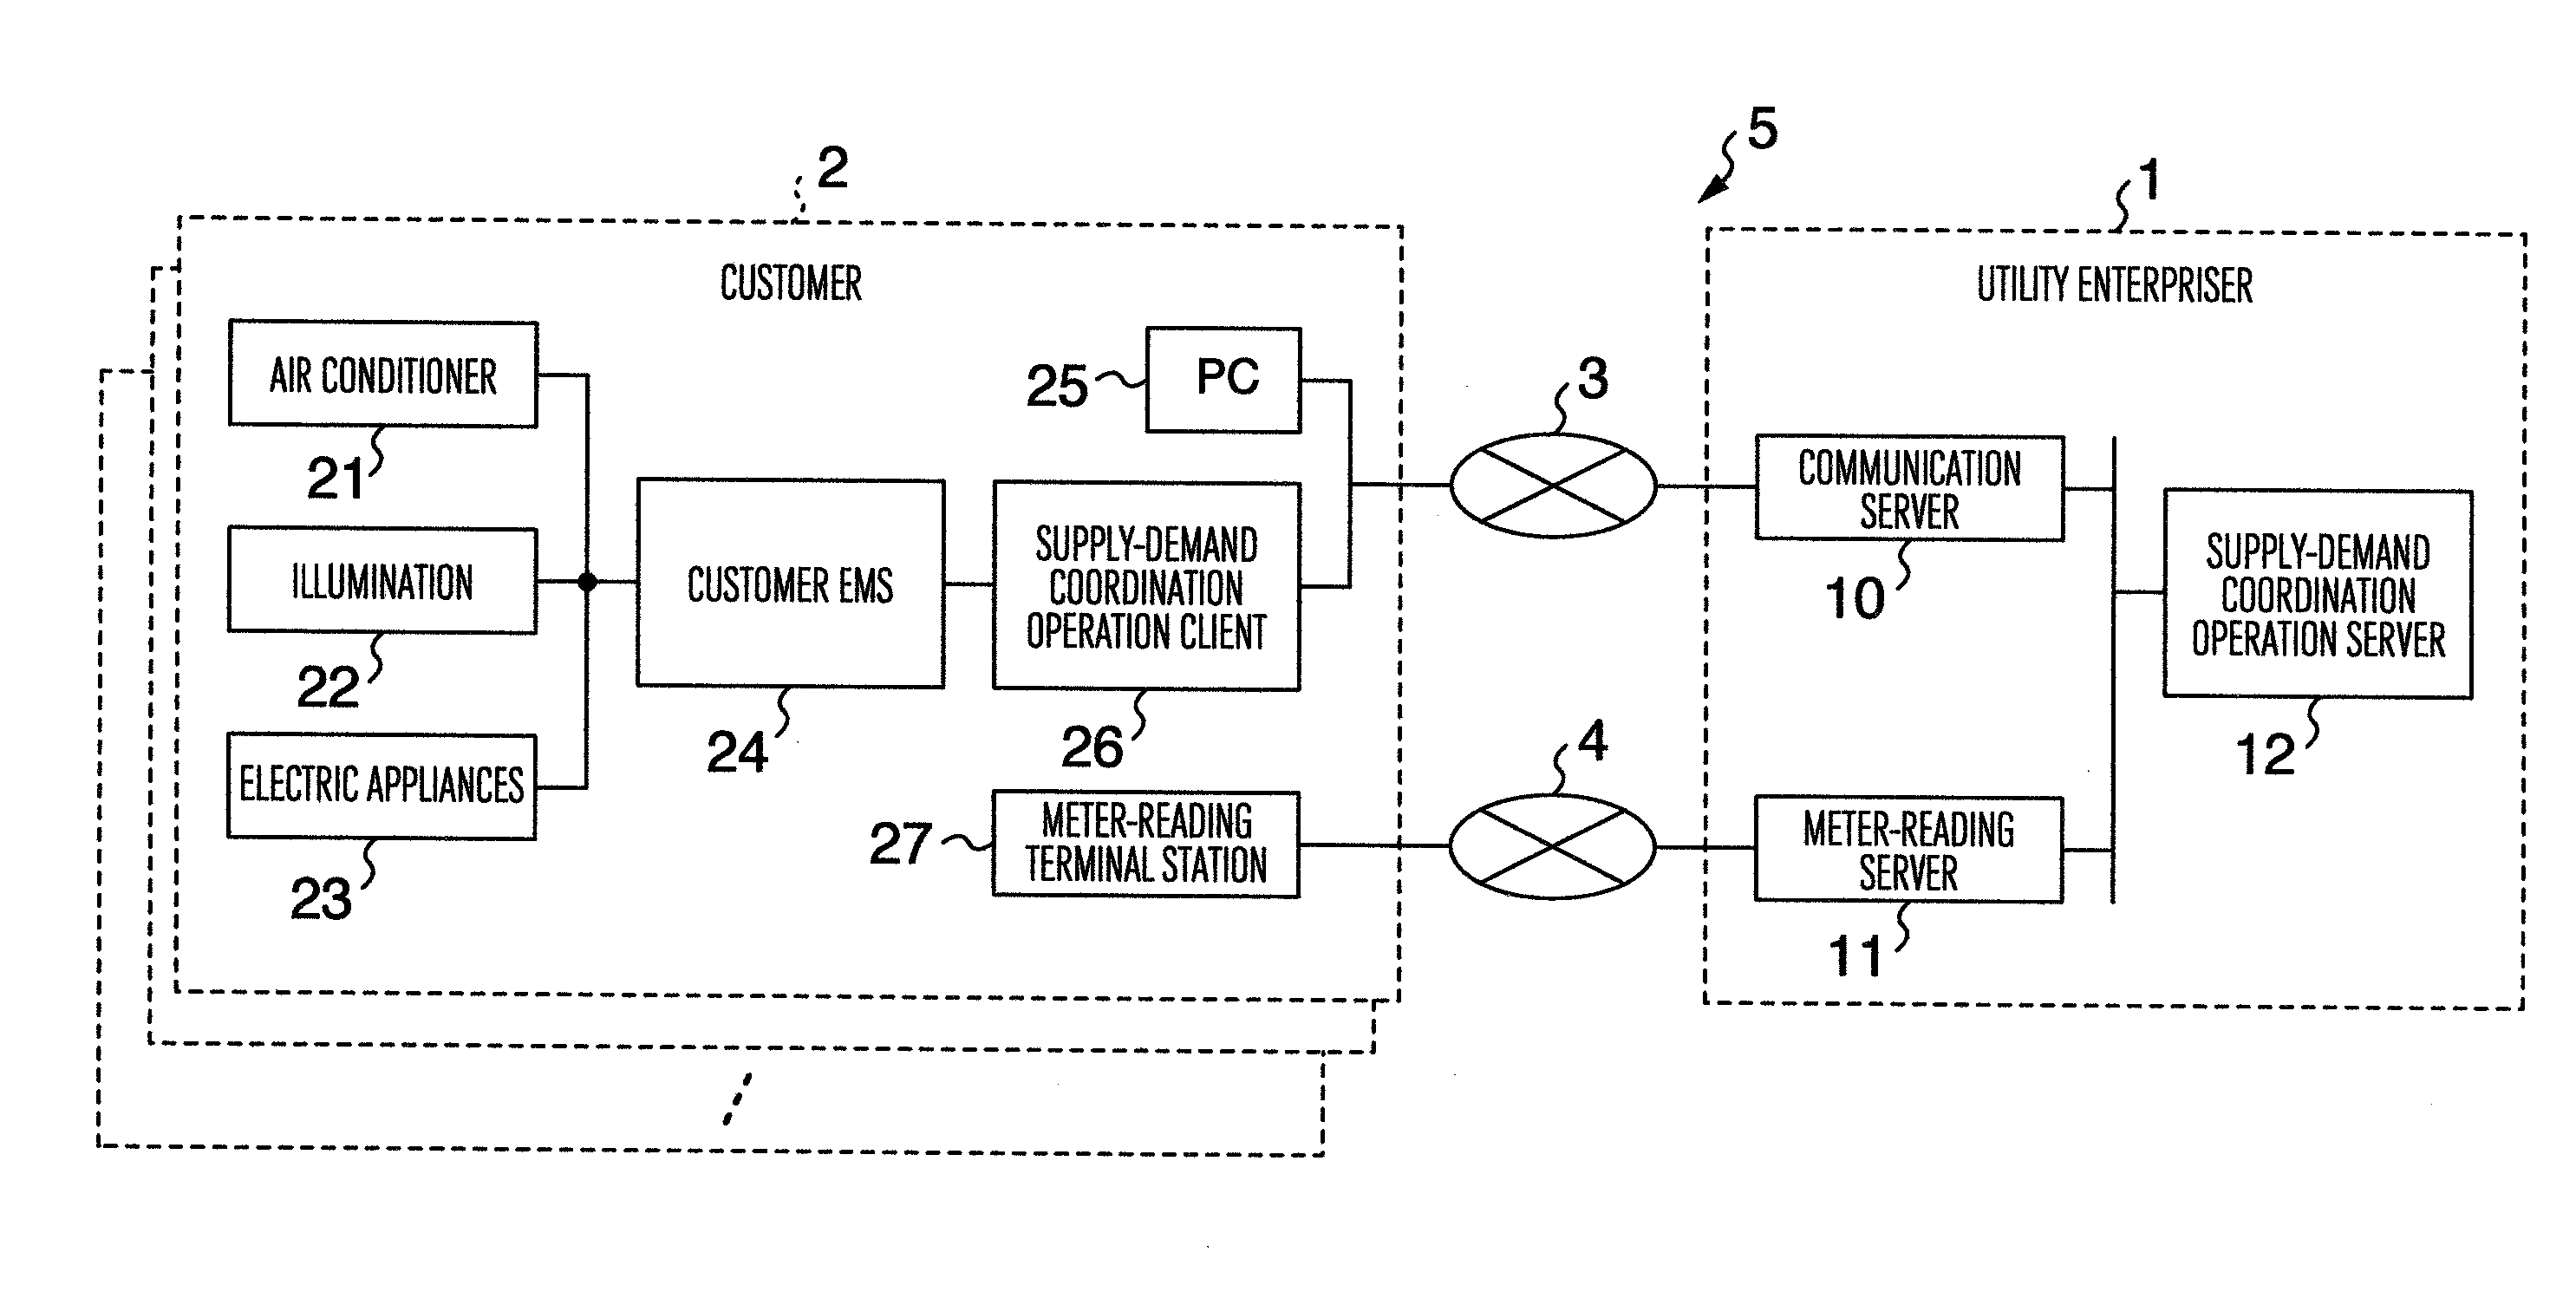 Energy management apparatus for customers